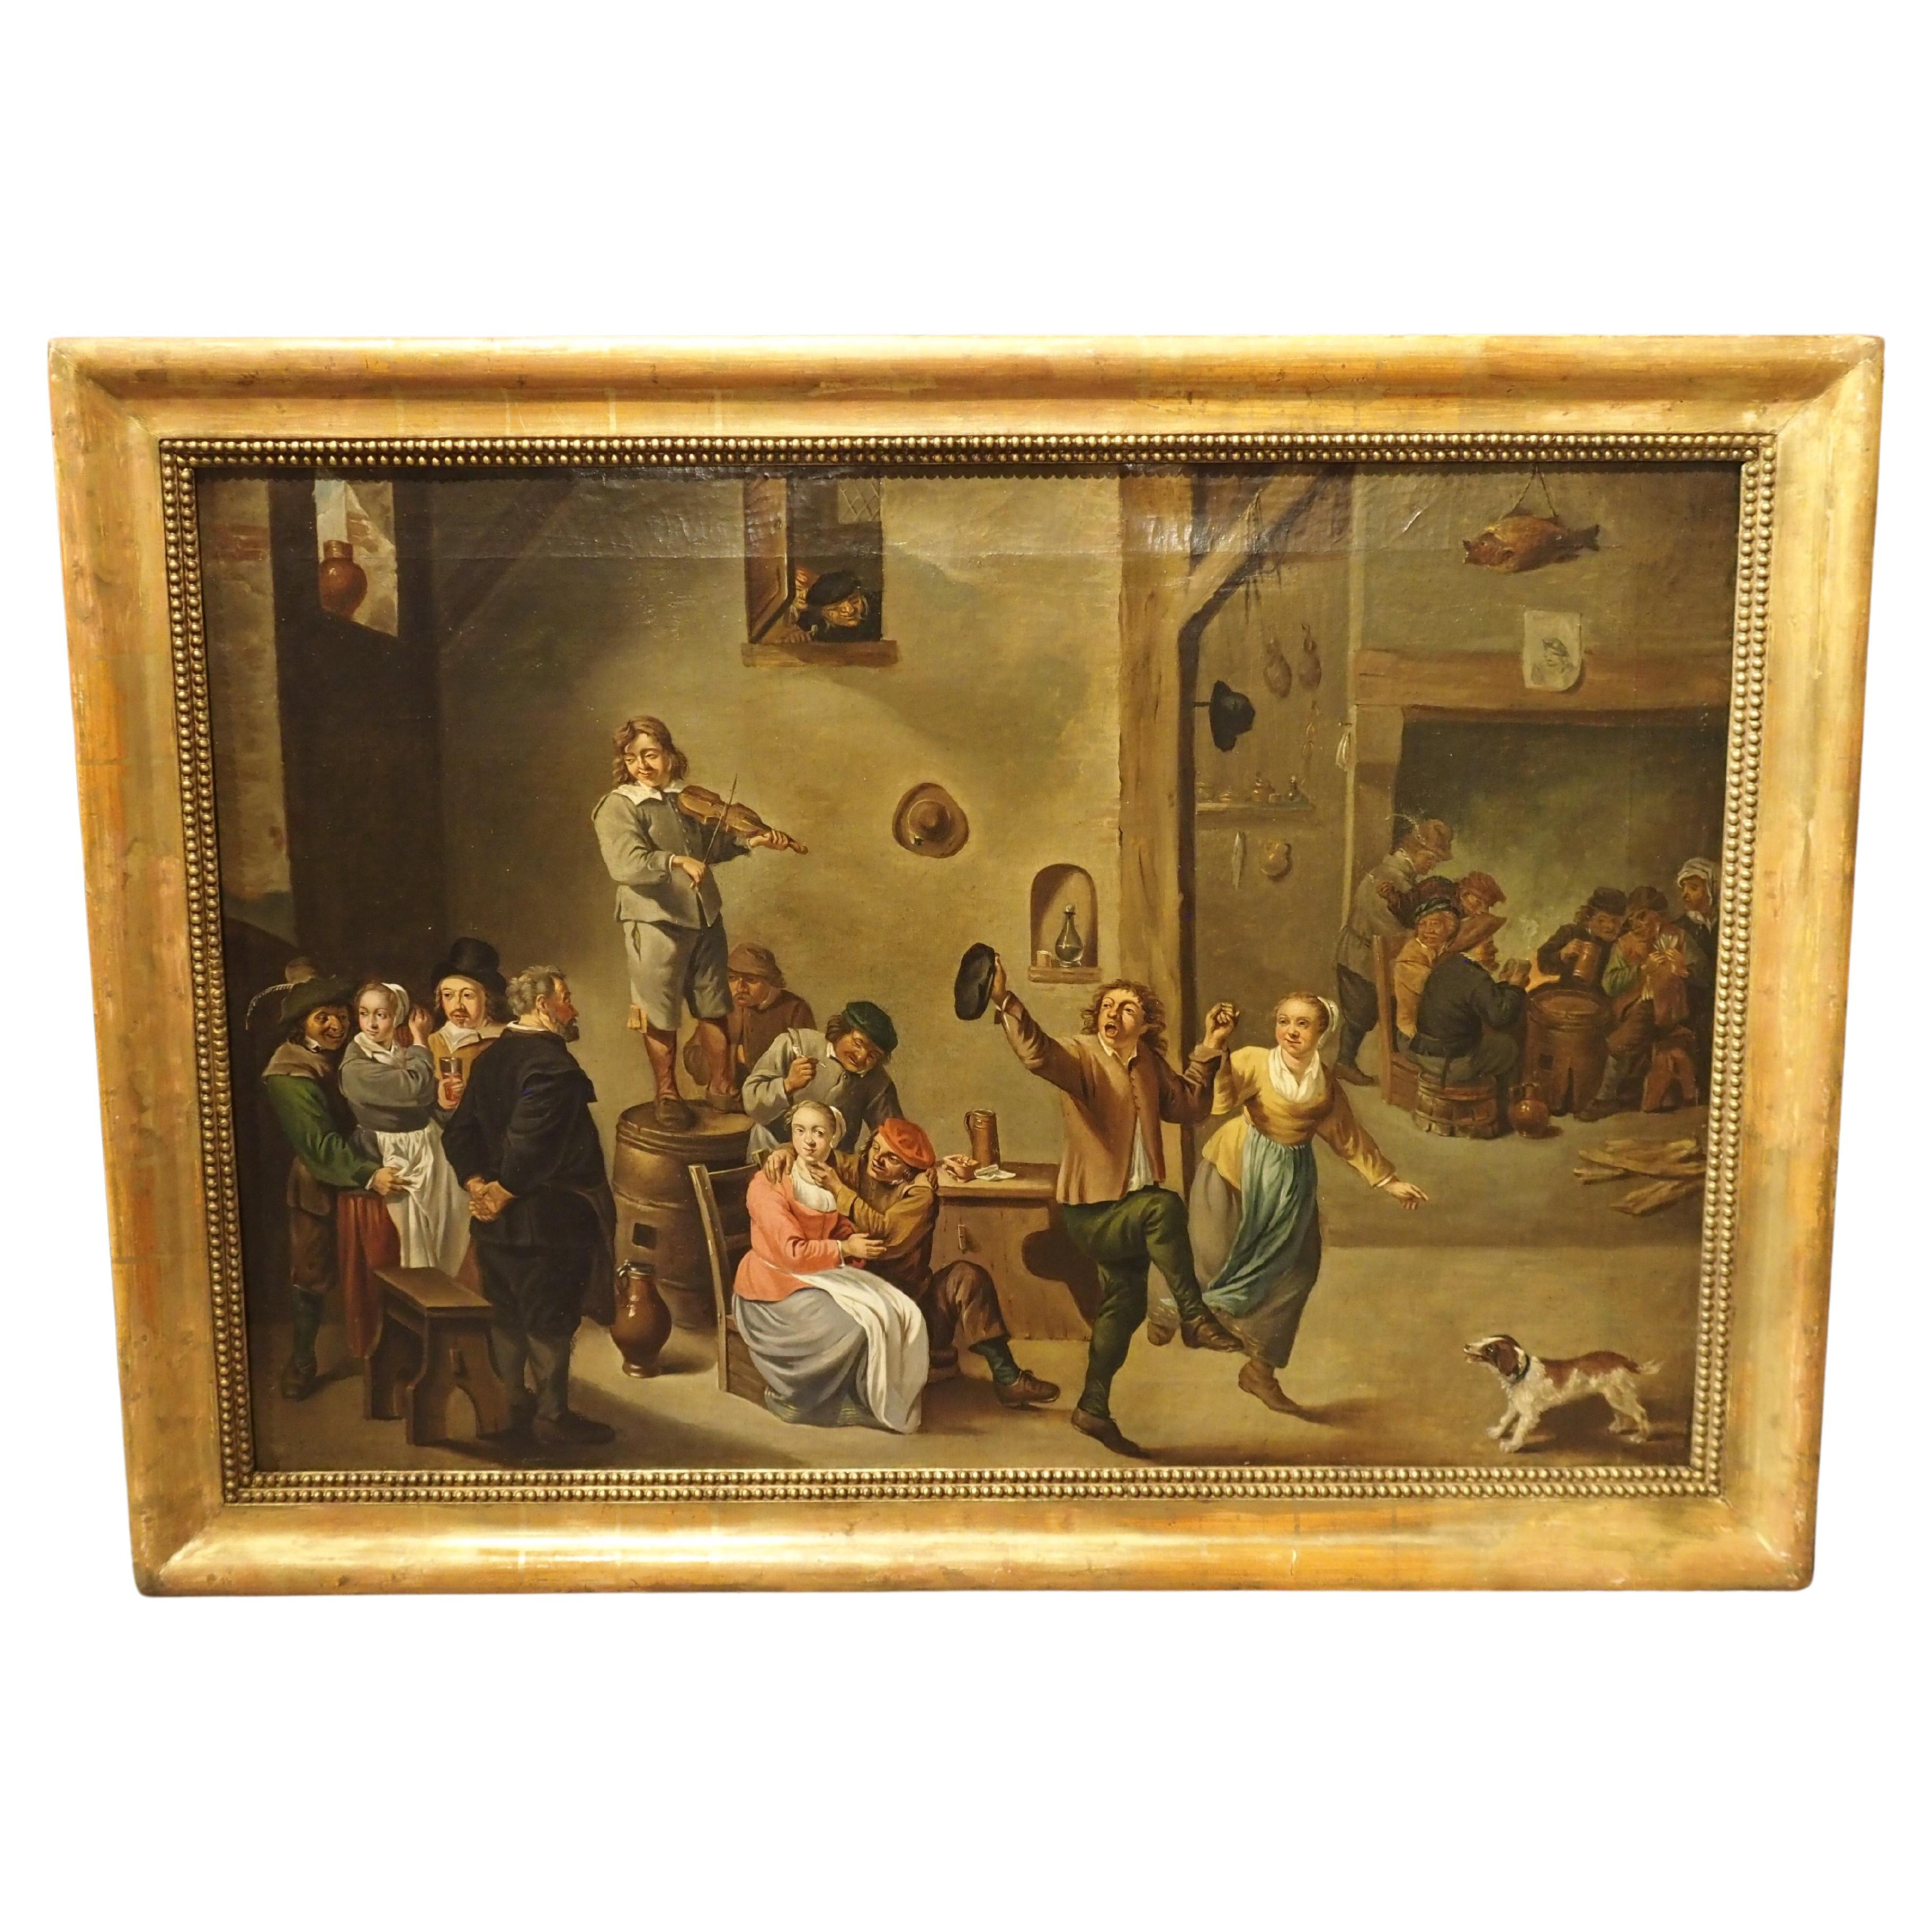 Antique Oil on Canvas Painting, Interior of an Inn with Dancing Peasants, 18th C